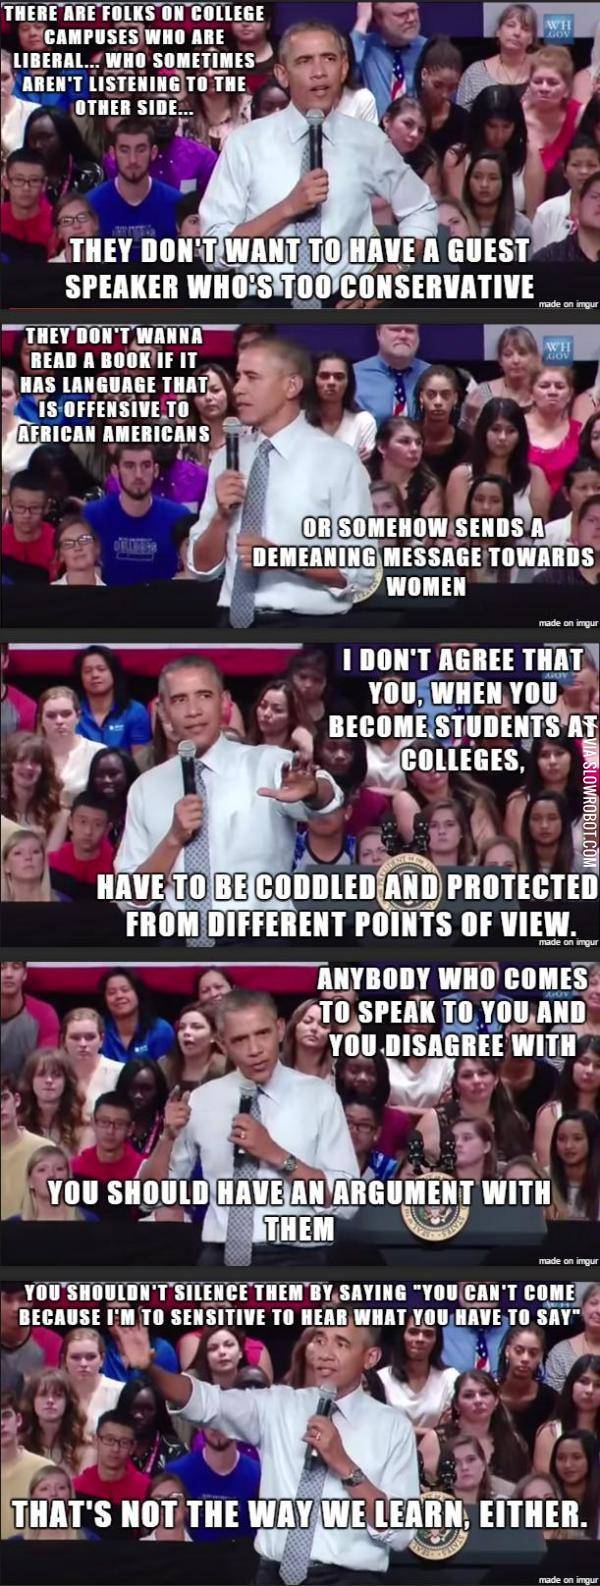 Obama+on+sensitivity+in+colleges